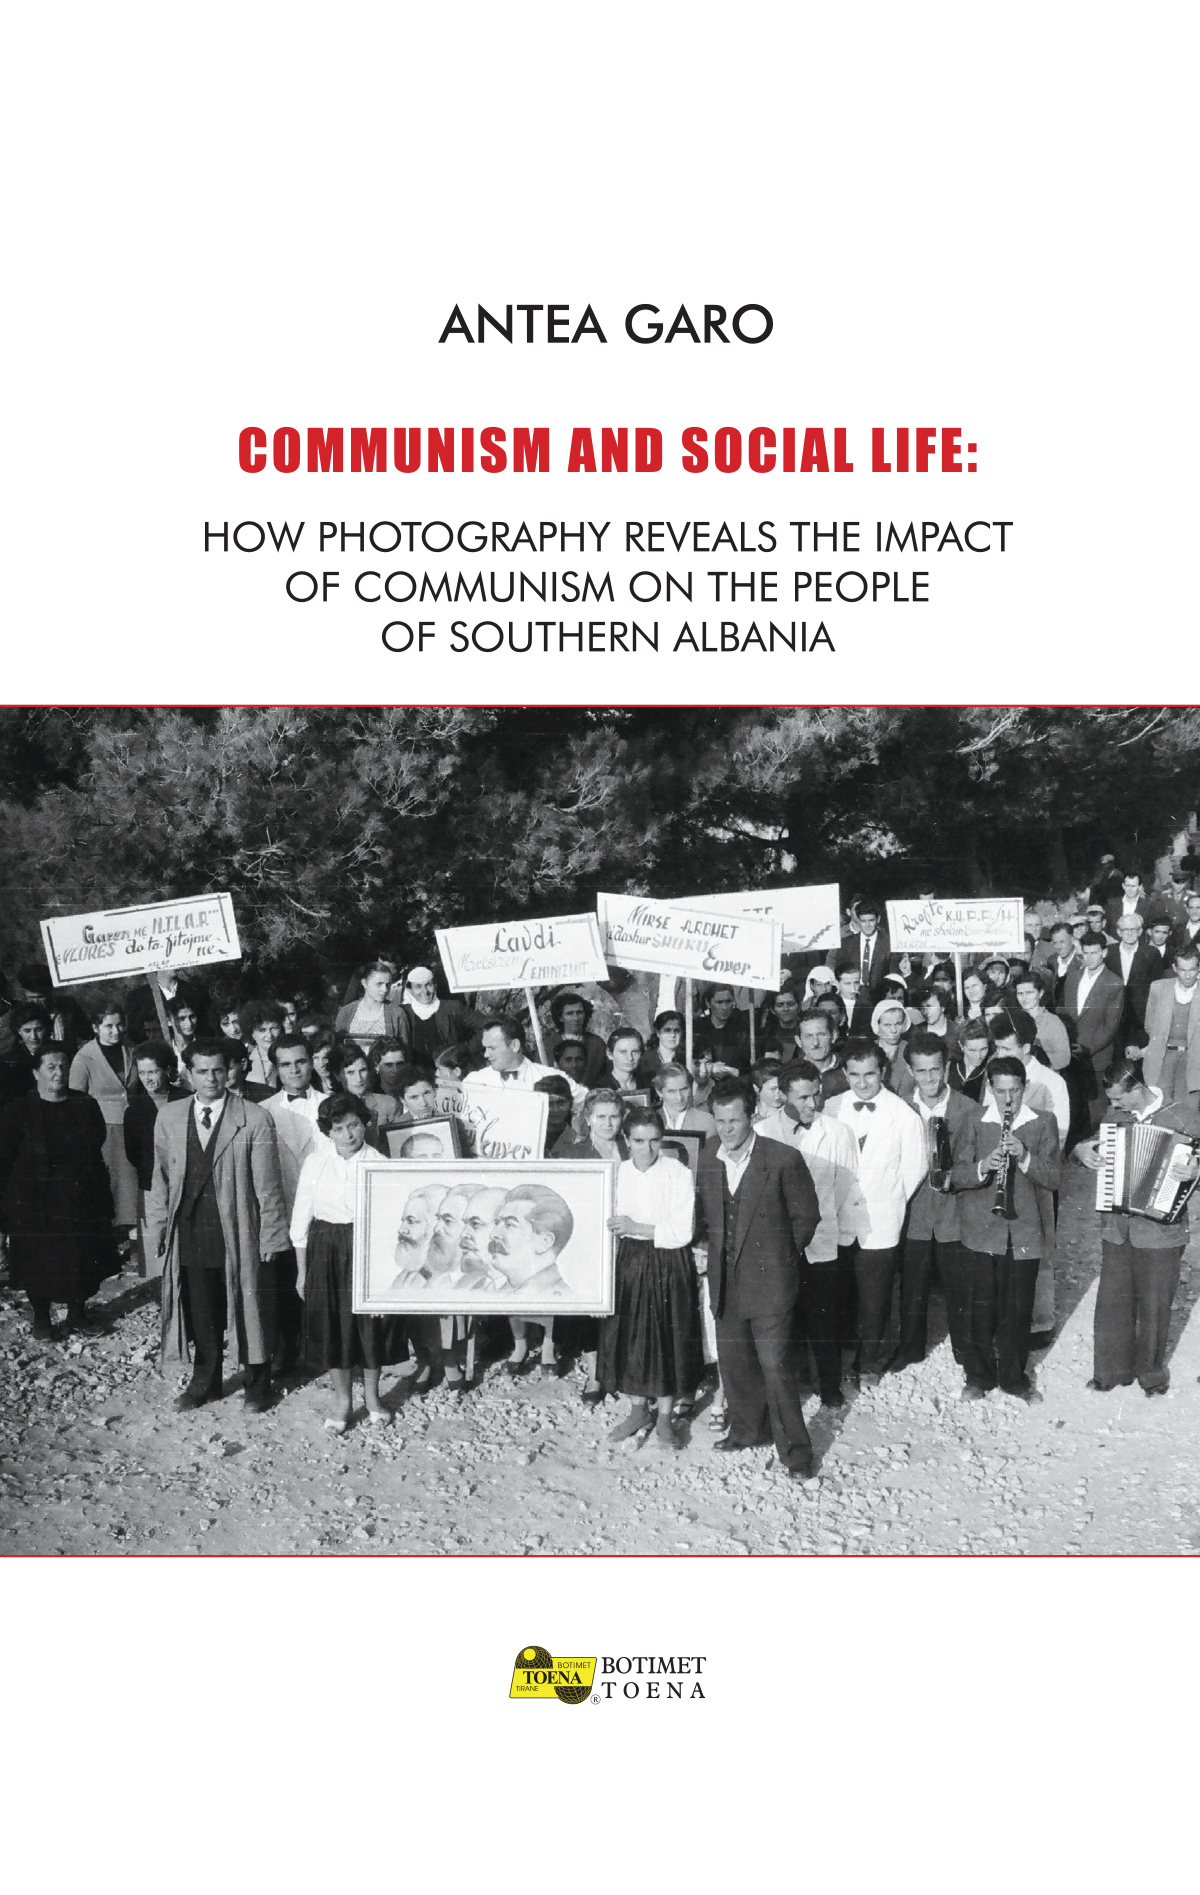 COMMUNISM AND SOCIAL LIFE: HOW PHOTOGRAPHY REVEALS THE IMPACT OF COMMUNISM ON THE PEOPLE OF SOUTHERN ALBANIA